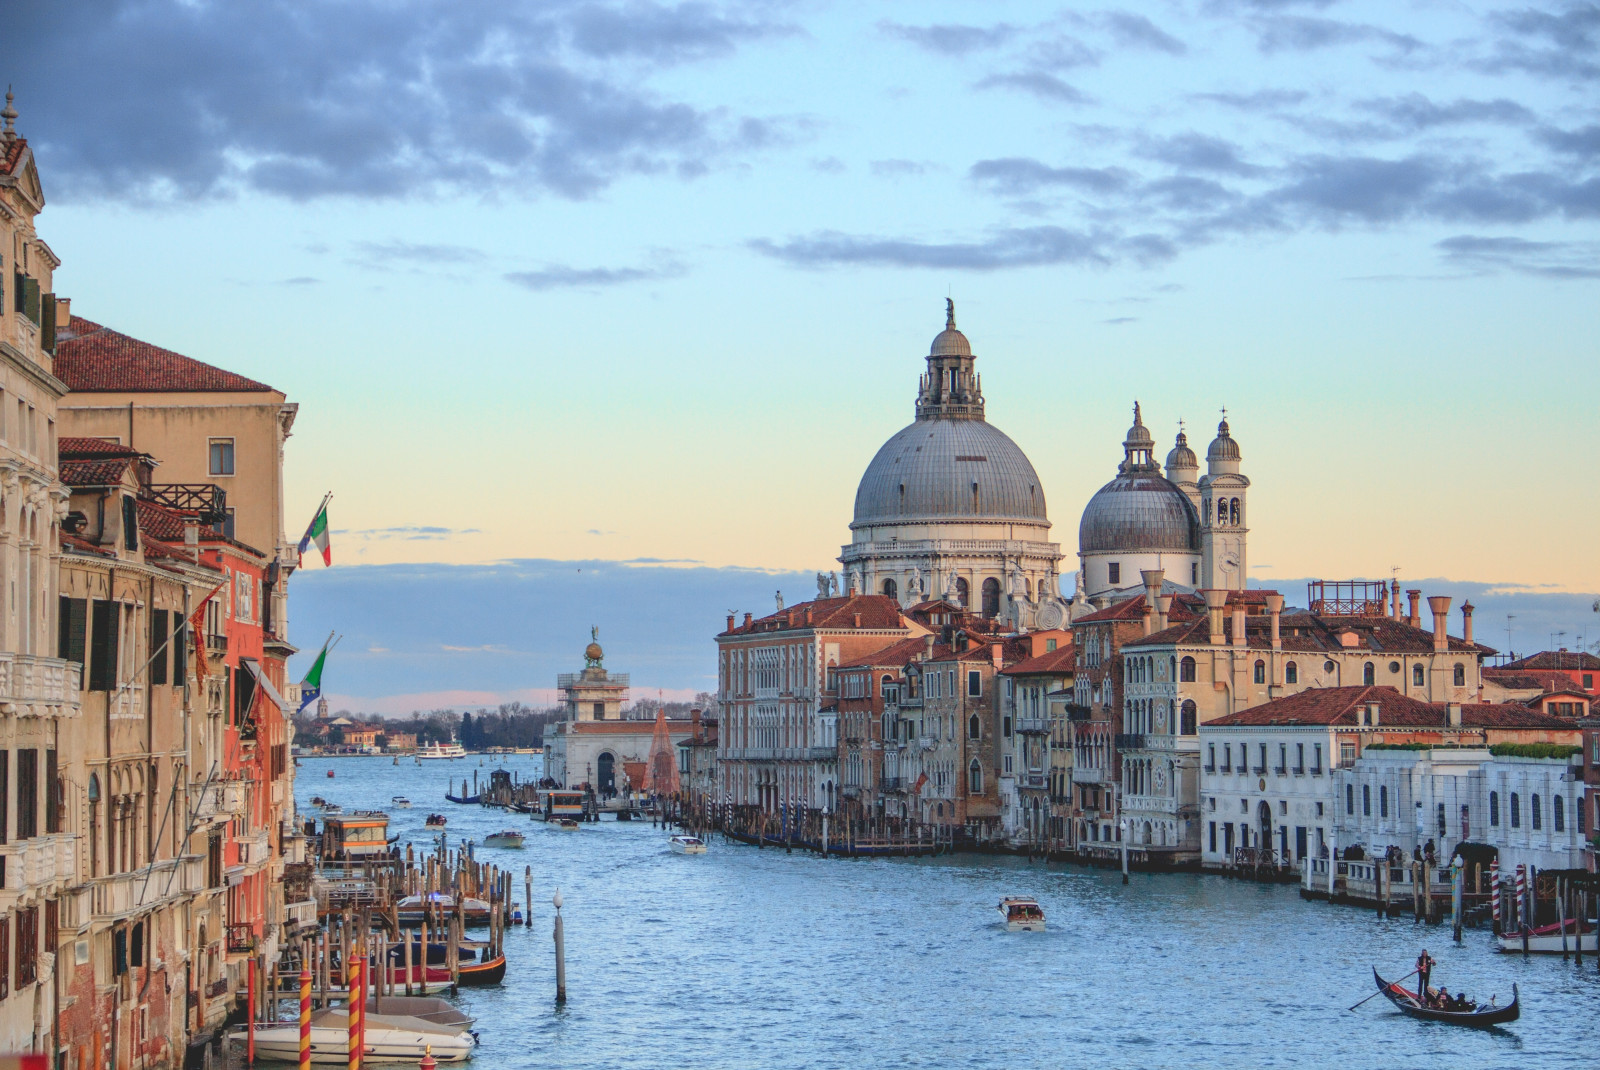 A panoramic view of the Grand Canal of Venice.